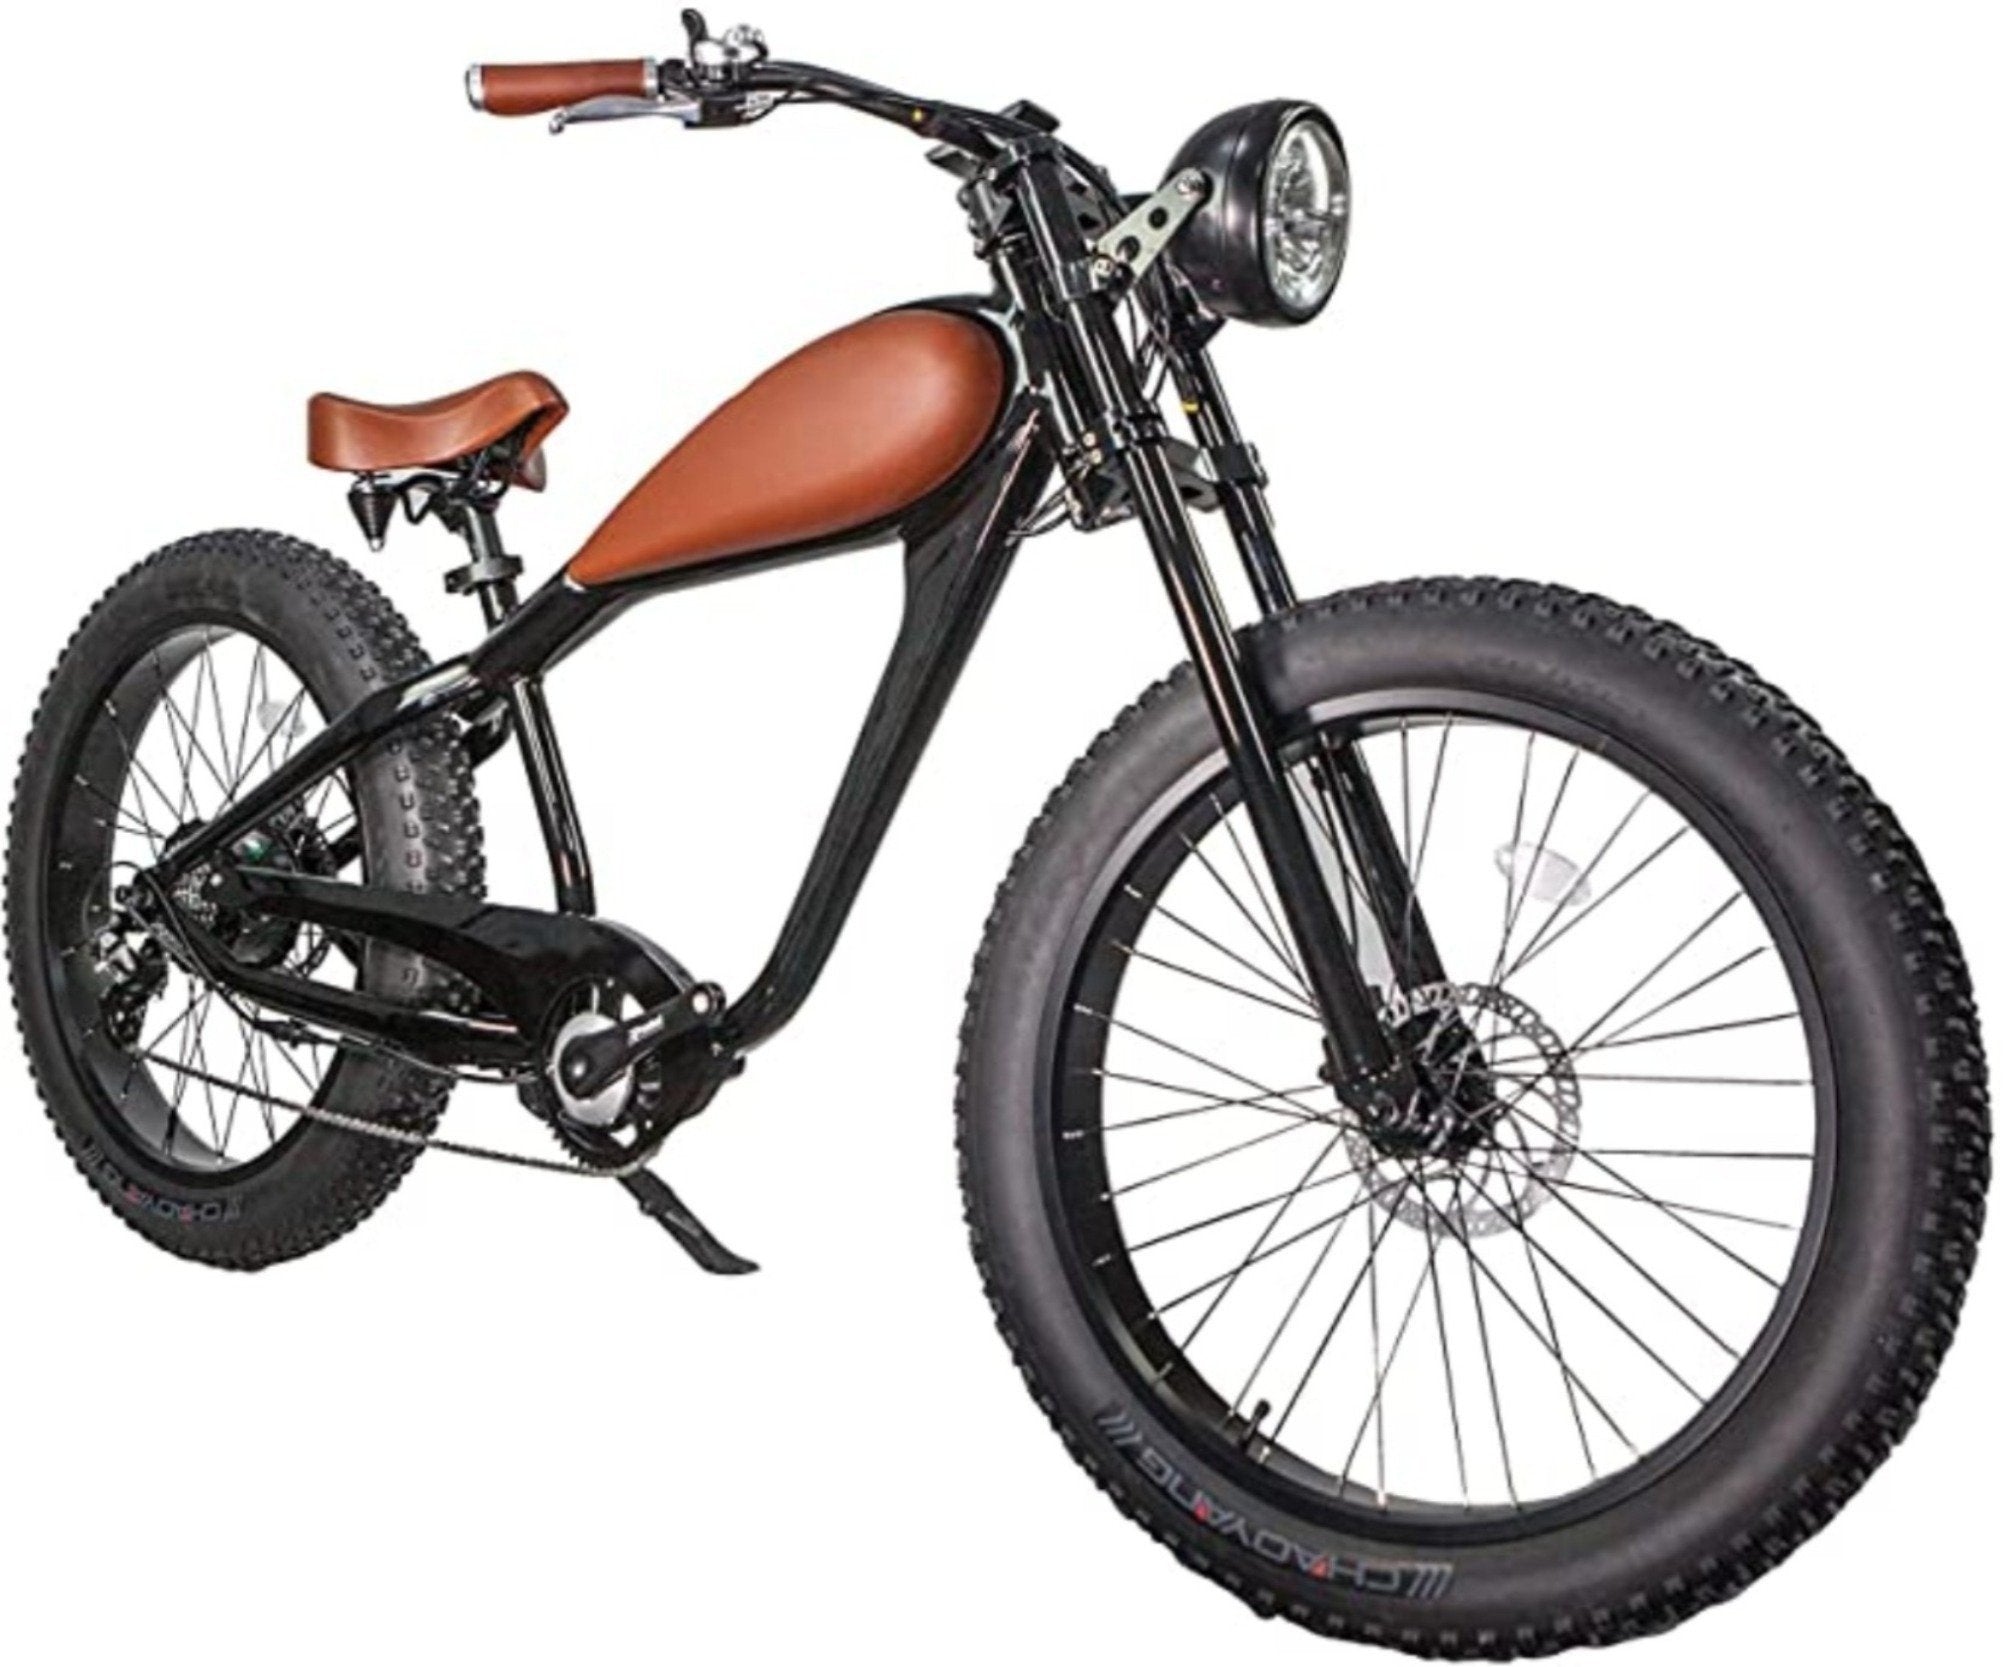 CIVI BIKES CHEETAH - THE CAFE RACER ELECTRIC BICYCLE 2021  REVI BIKES electric bike. One of the best ebikes in 2021 and one of the best electric bikes in 2020!